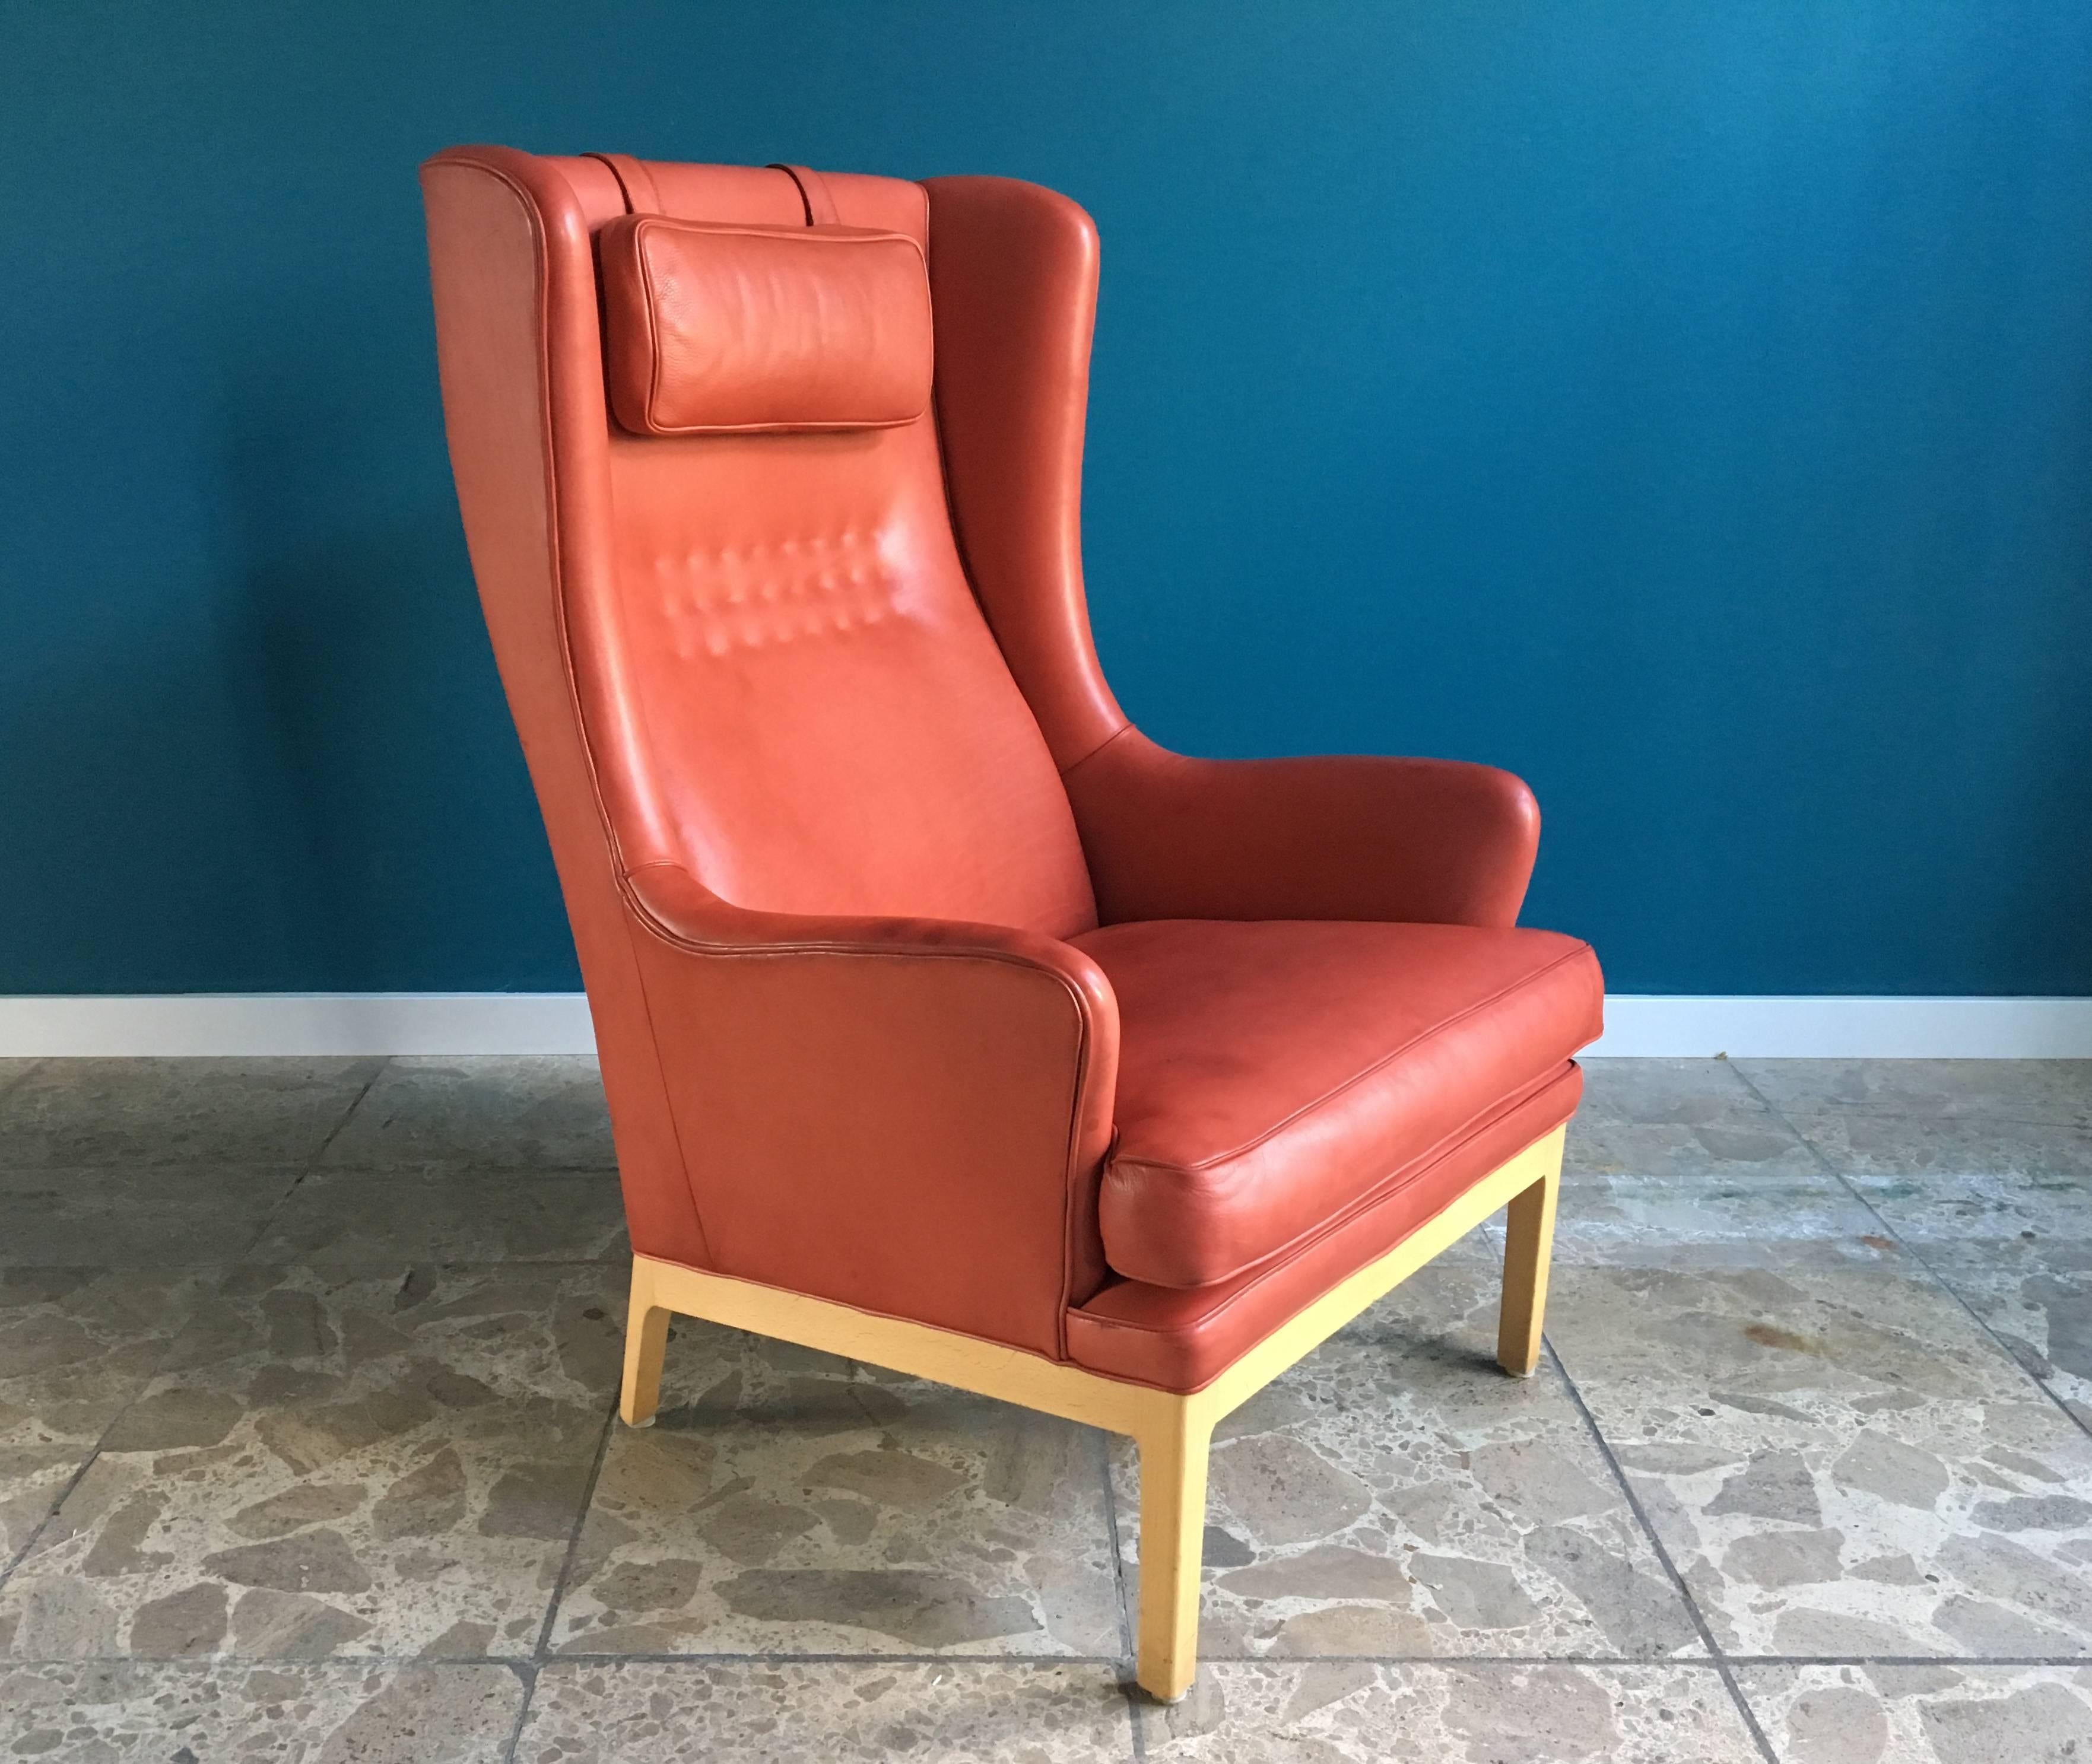 This wing chair was designed by Arne Norell and produced by his company Norell AB in Sweden. The structure is made of beech wood, the chair is upholstered with a pink leather that has a beautiful patina. The chair has an adjustable neck